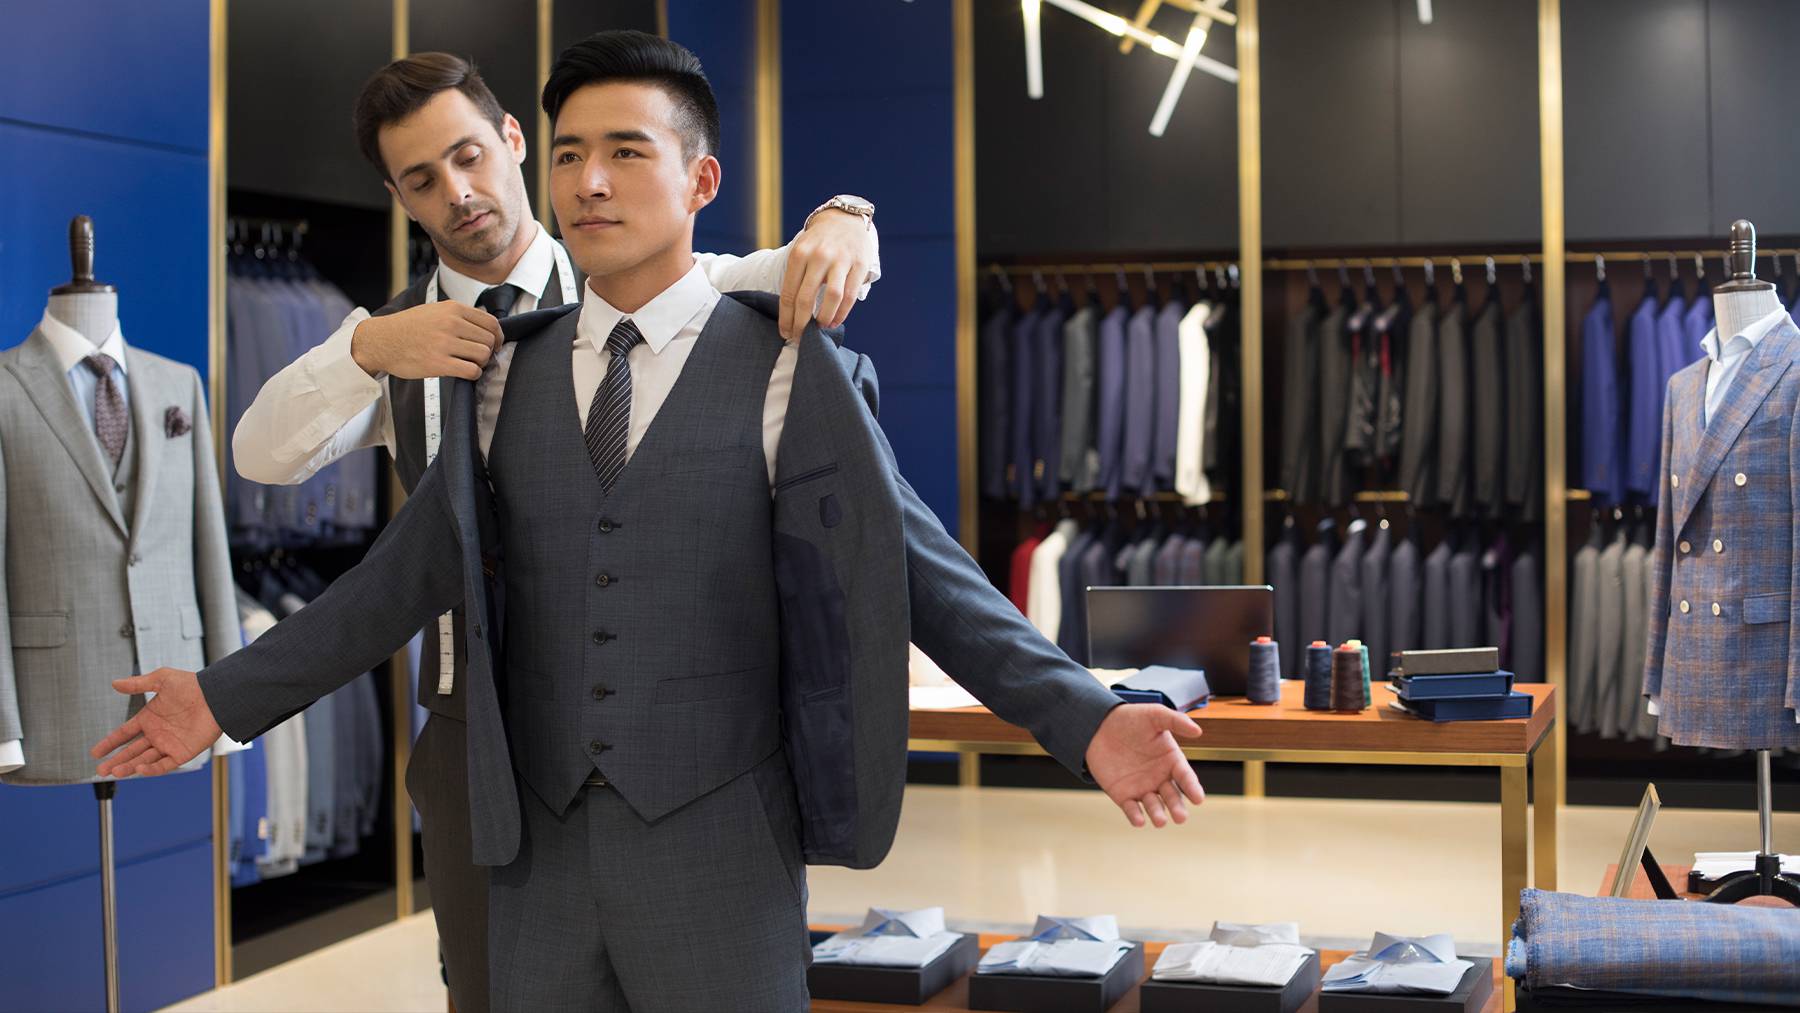 A tailor and customer stand in a tailor boutique. The customer is trying on a three piece grey suit with a white shirt and tie.